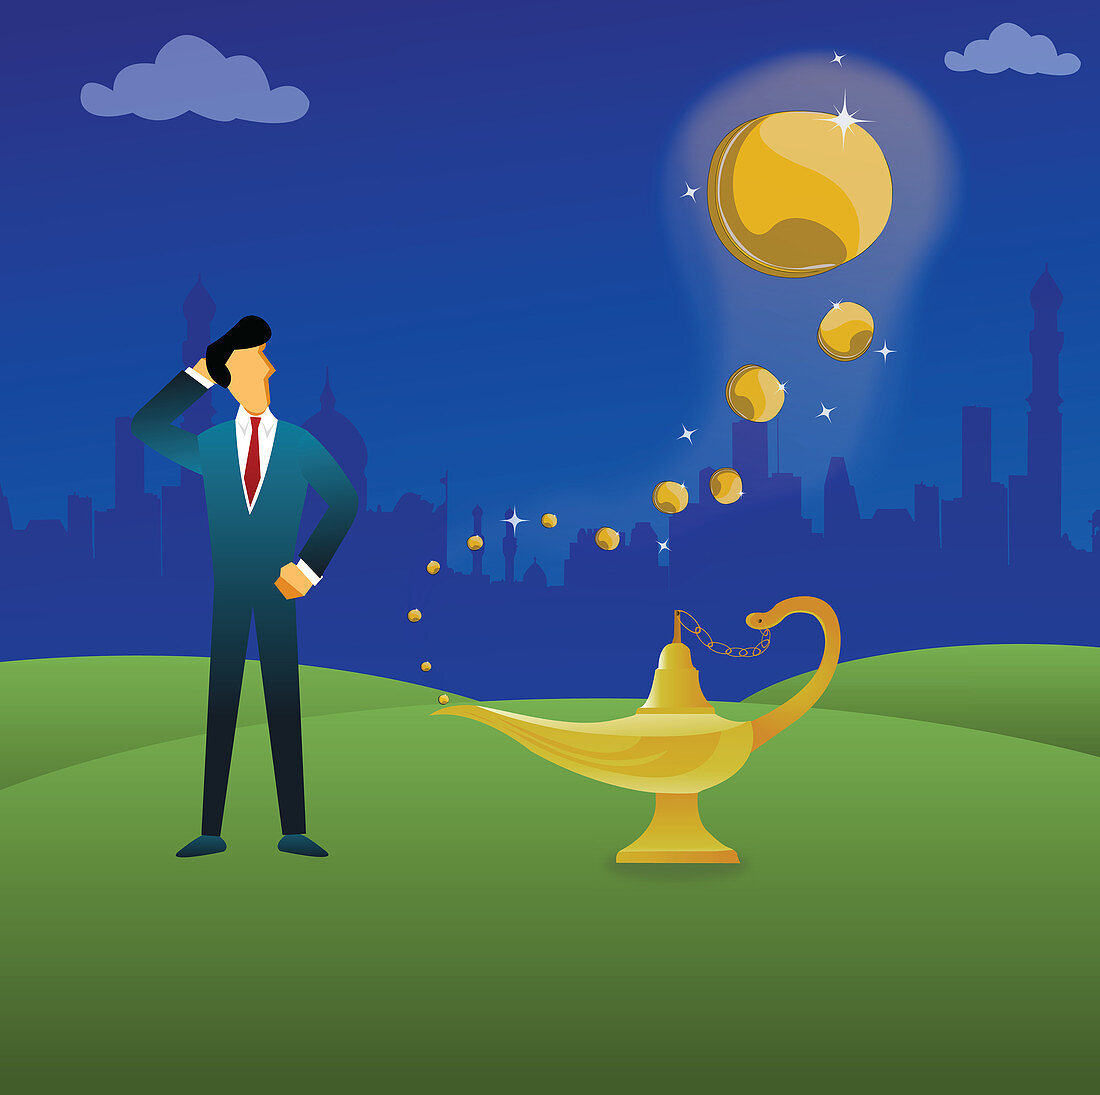 Businessman standing next to a magical lamp, illustration